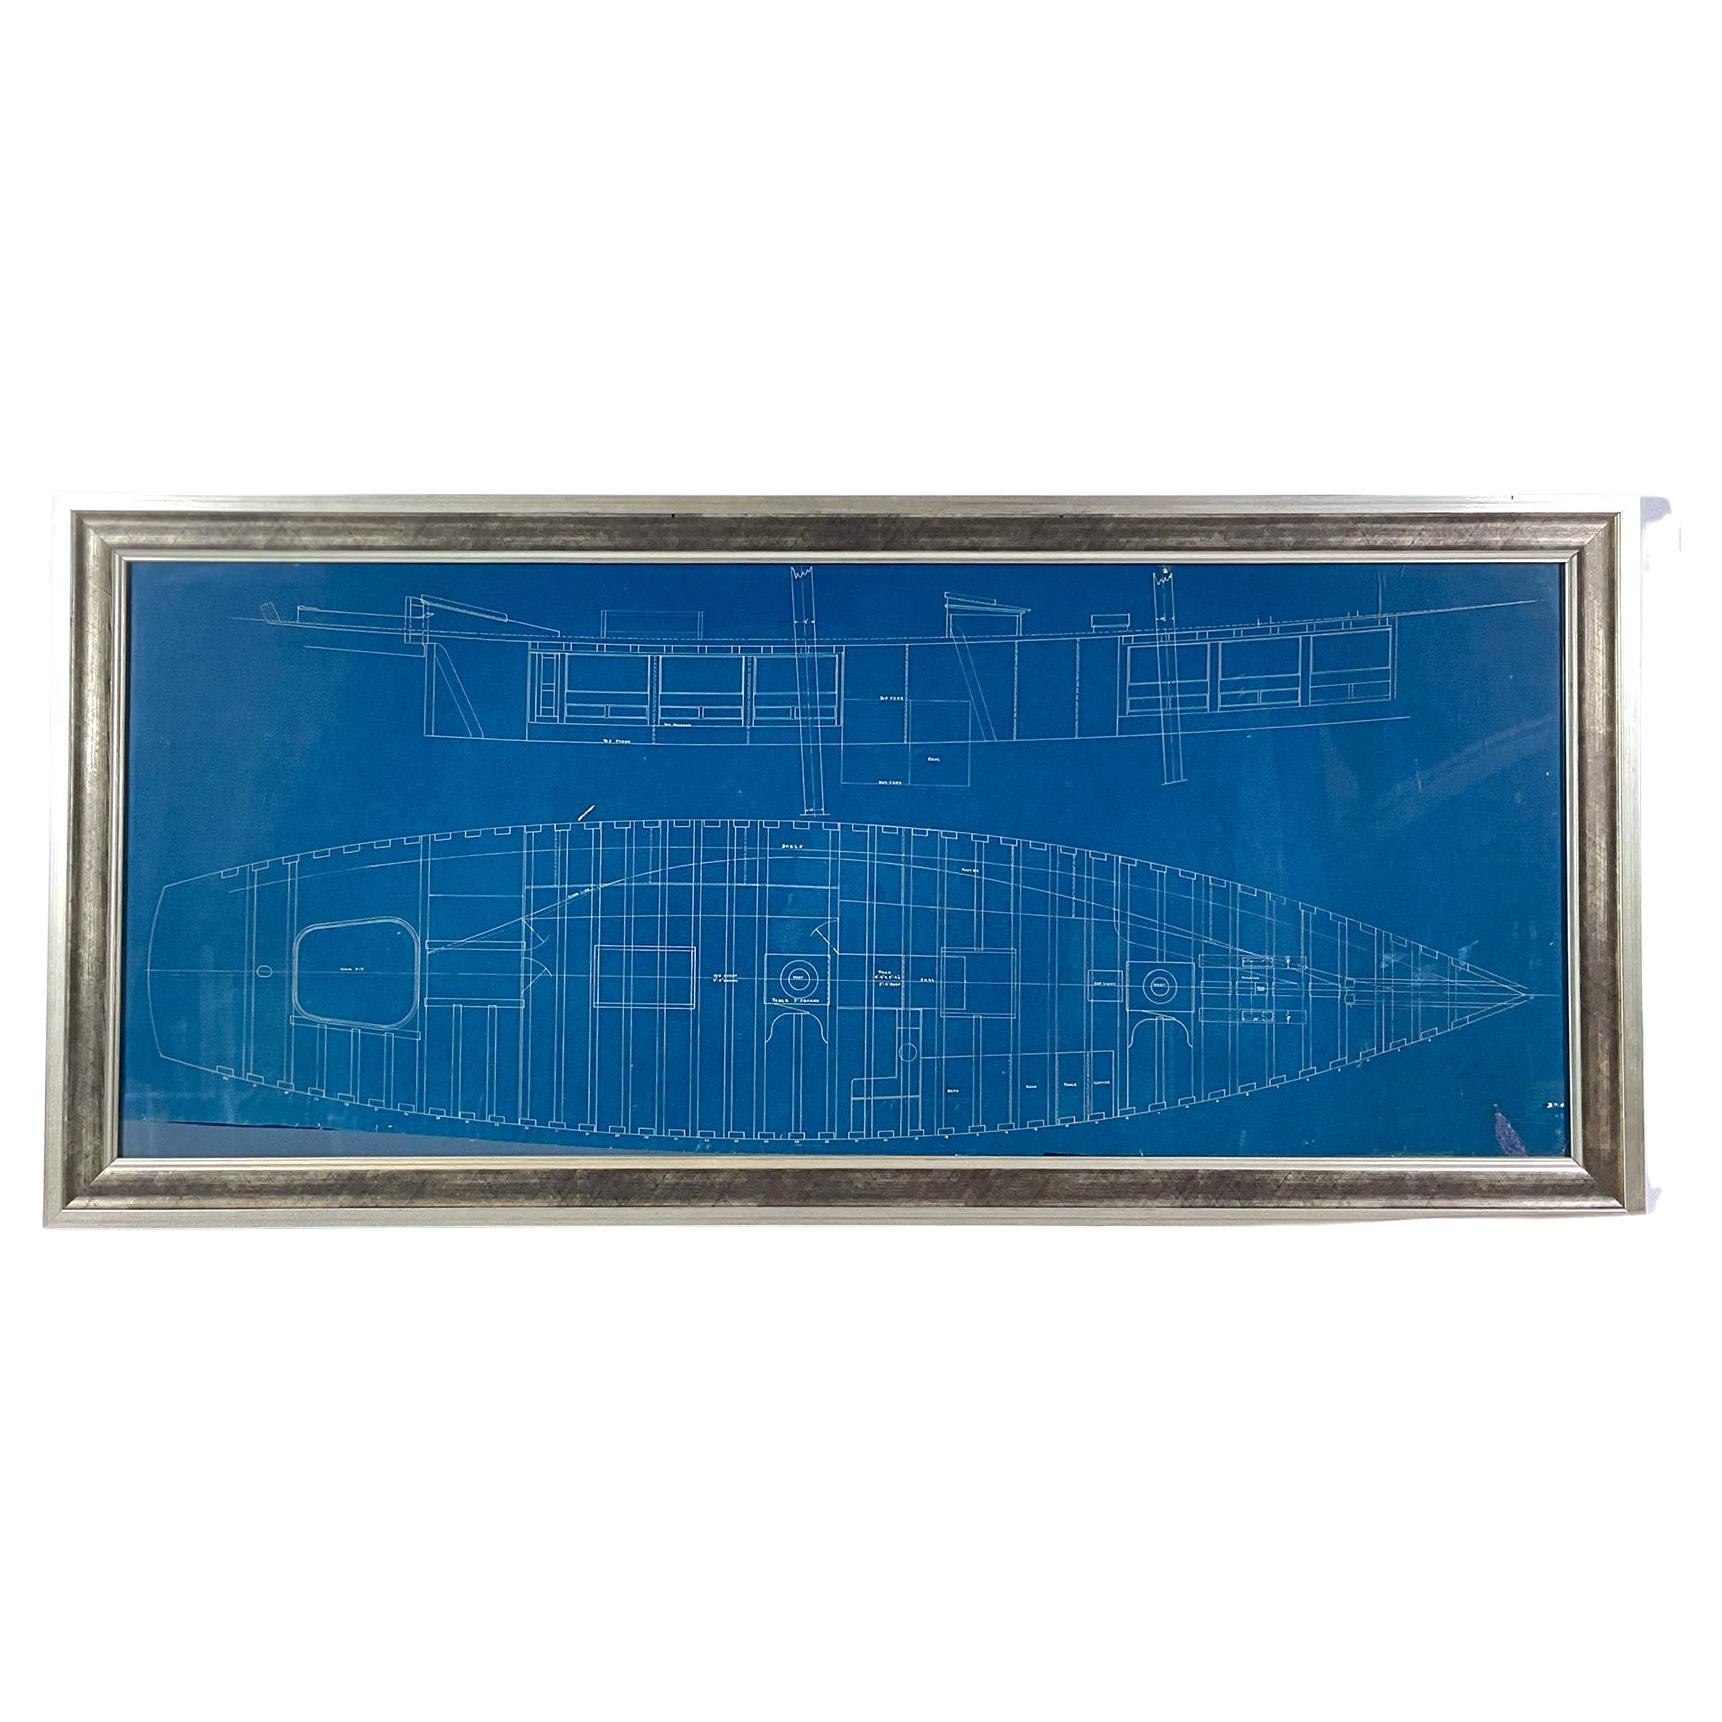 Framing Blueprint For The Yacht "Columbia"